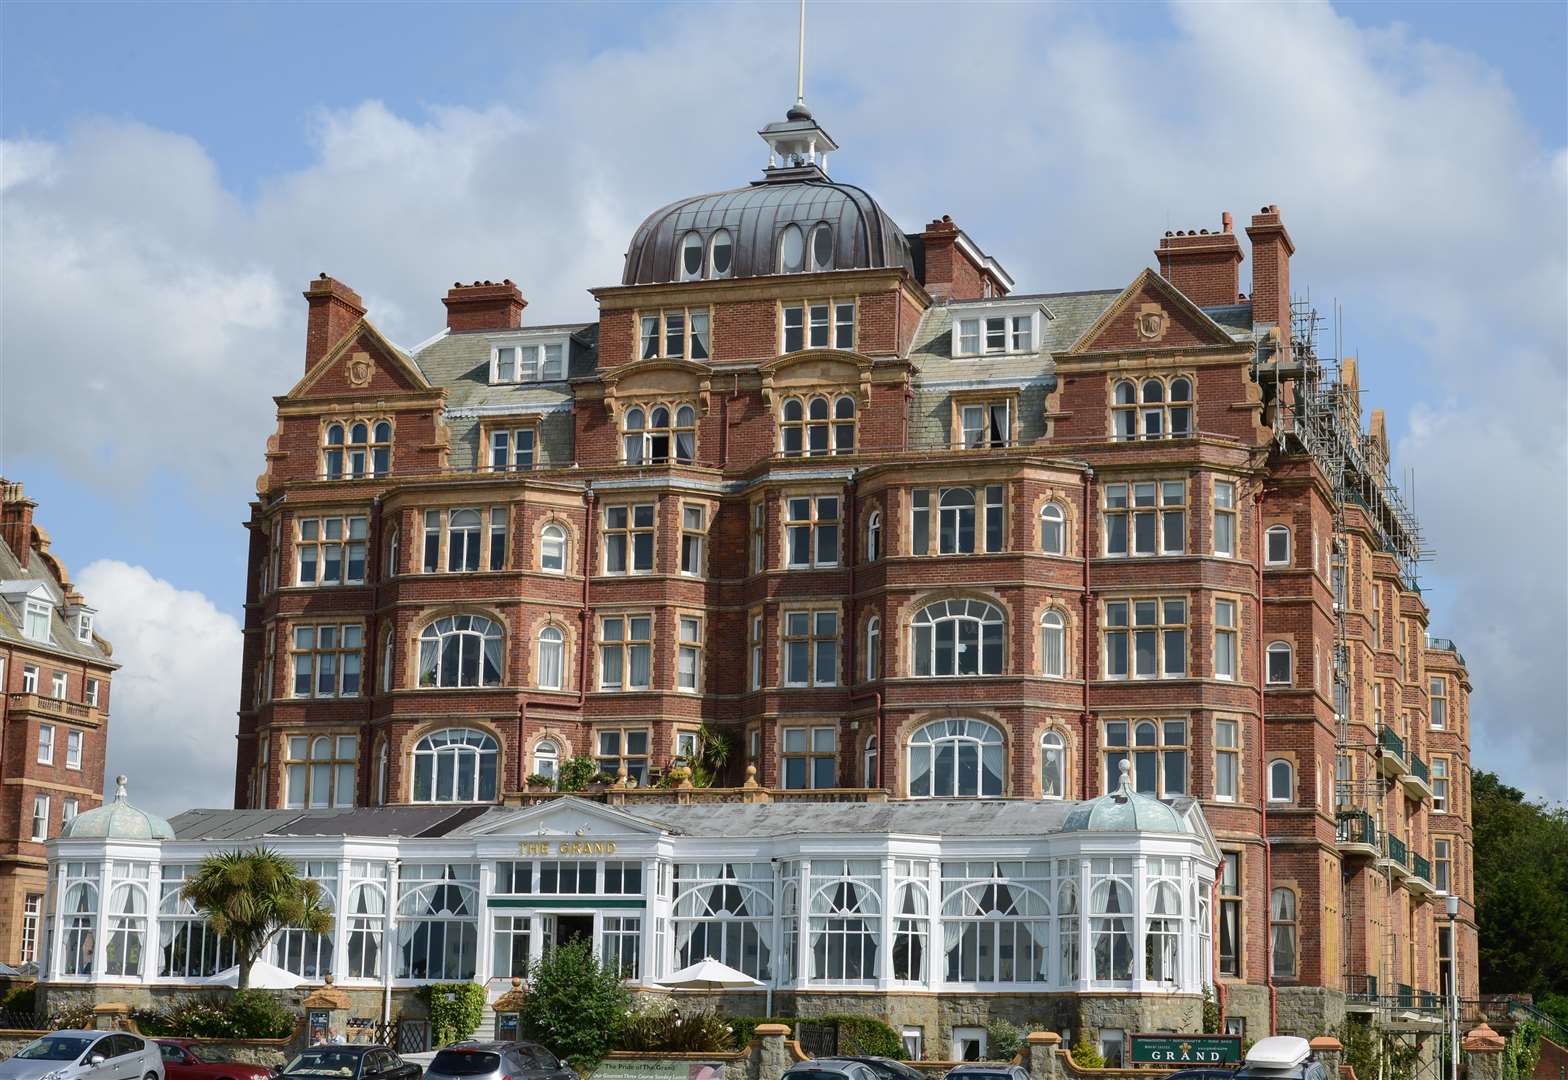 The Grand, which has changed hands after the previous directors were declared bankrupt